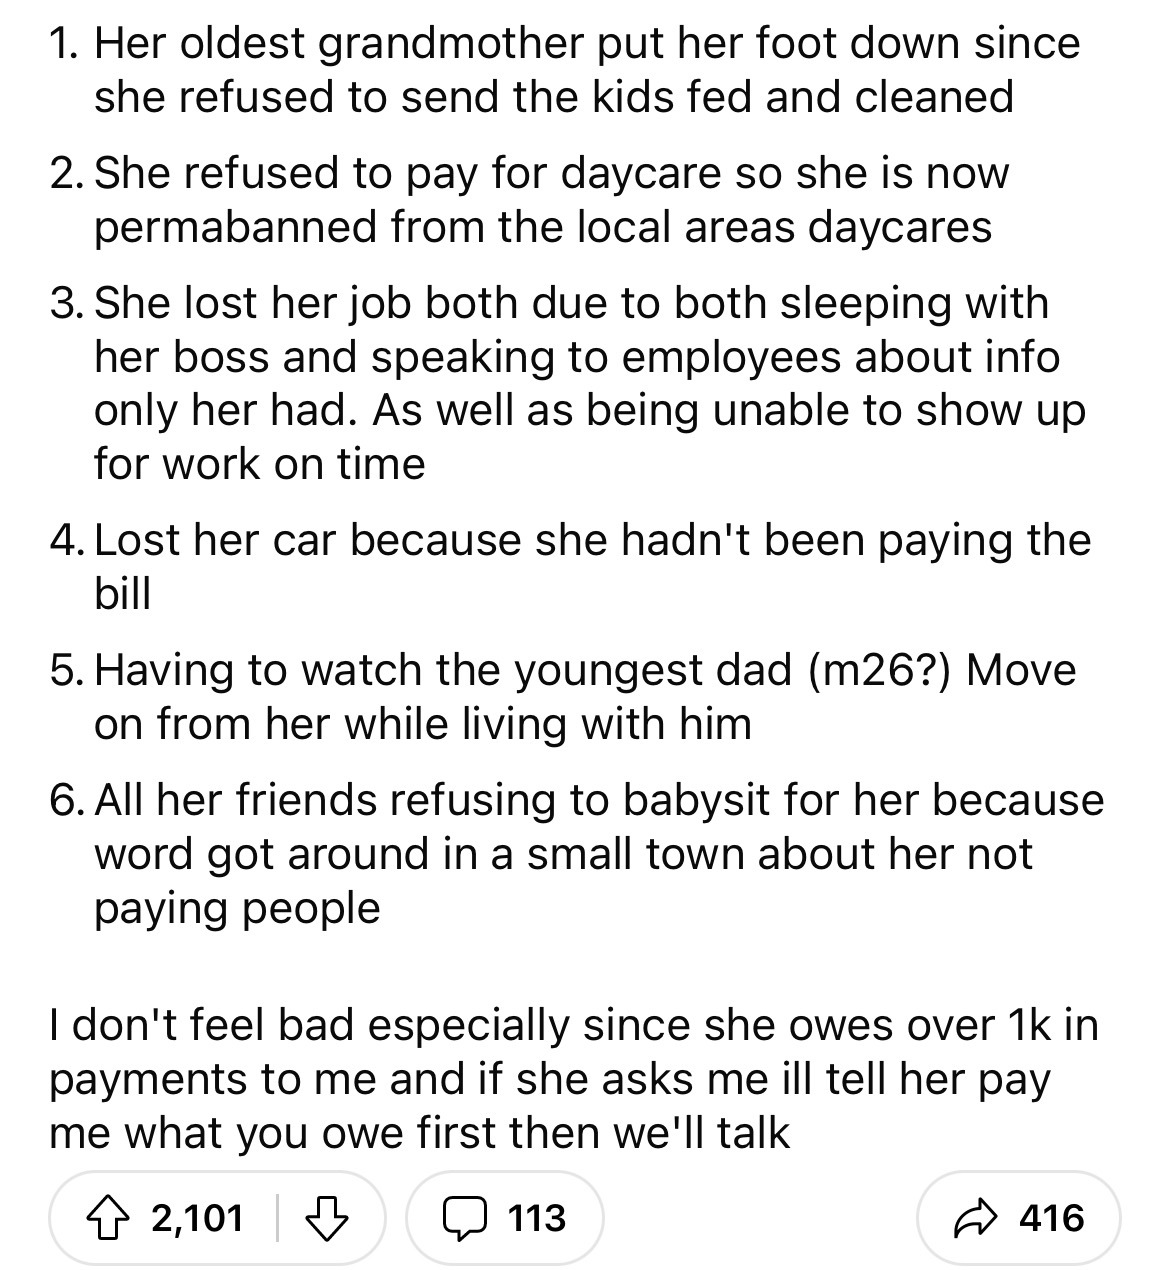 gf cheating stories - 1. Her oldest grandmother put her foot down since she refused to send the kids fed and cleaned 2. She refused to pay for daycare so she is now permabanned from the local areas daycares 3. She lost her job both due to both sleeping wi